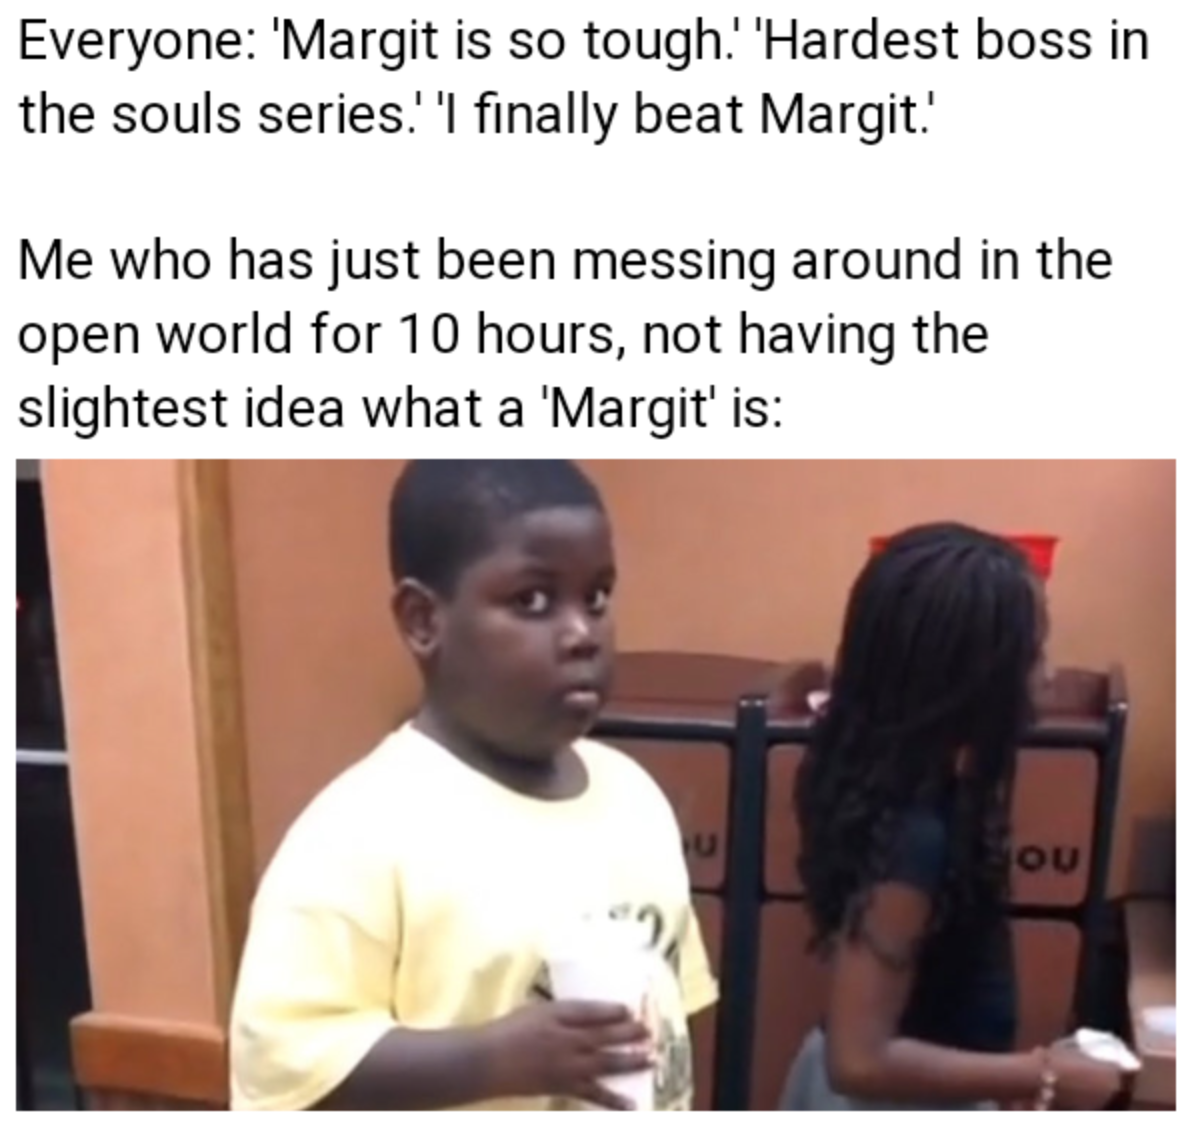 elden ring memes - funny blippi memes - Everyone 'Margit is so tough.'Hardest boss in the souls series.' 'I finally beat Margit. Me who has just been messing around in the open world for 10 hours, not having the slightest idea what a 'Margit' is Ou